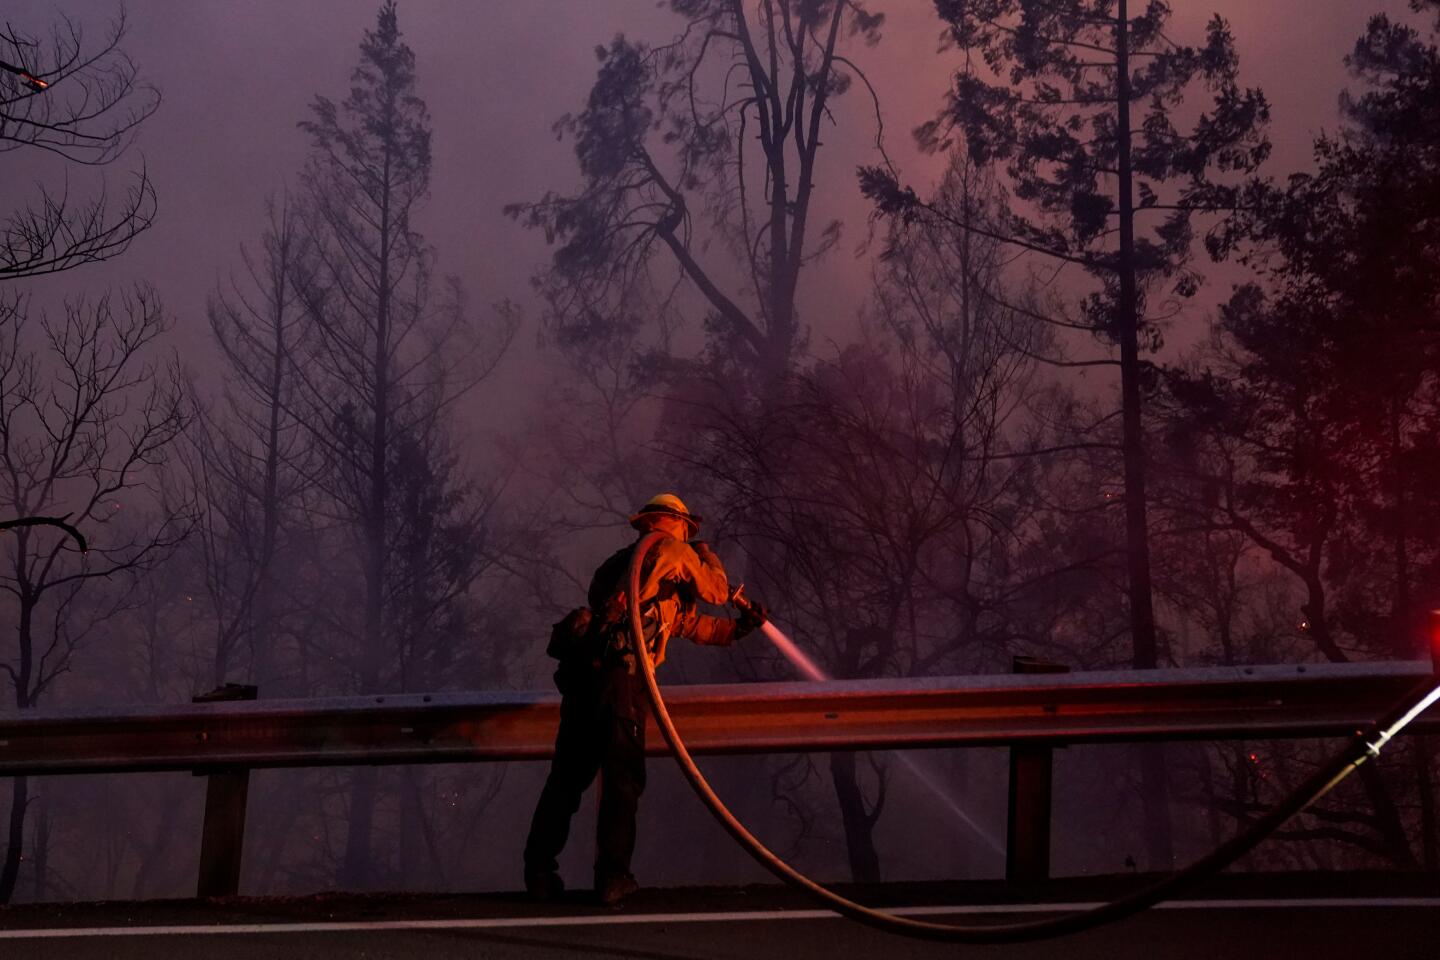 A firefighter sprays water amid thick smoke.